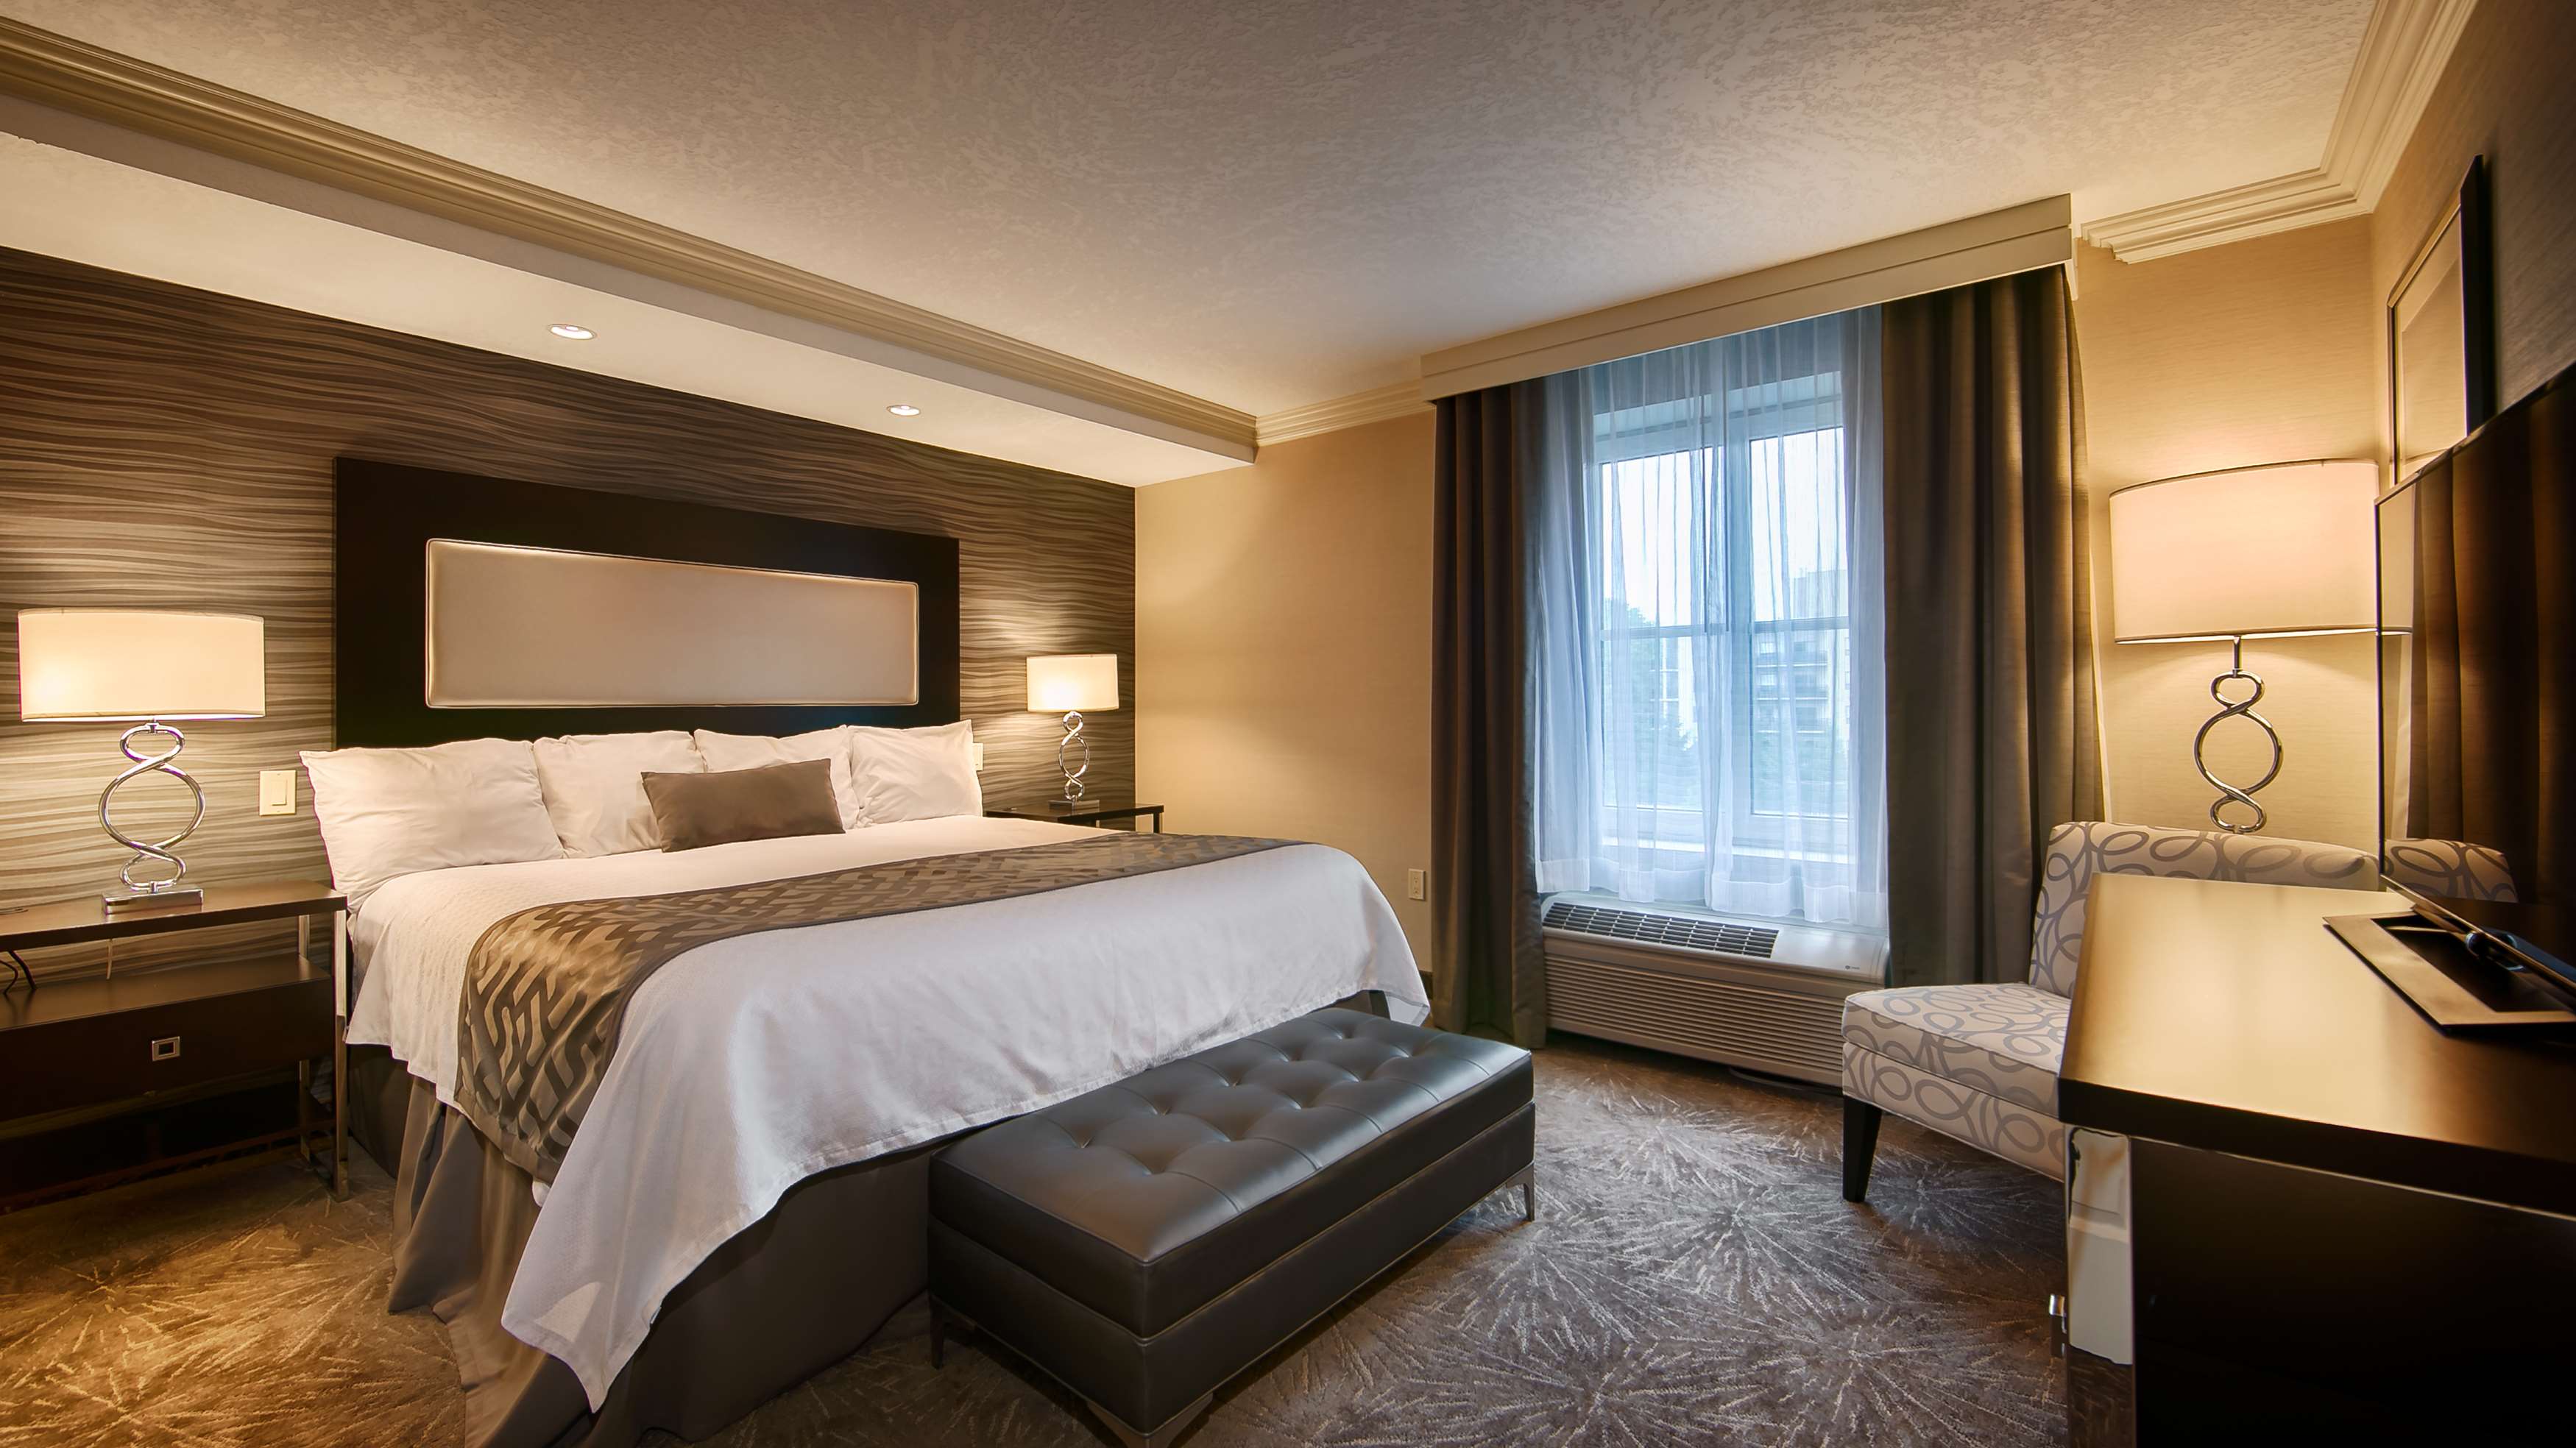 Deluxe King Suite Best Western Plus The Arden Park Hotel Stratford (519)275-2936